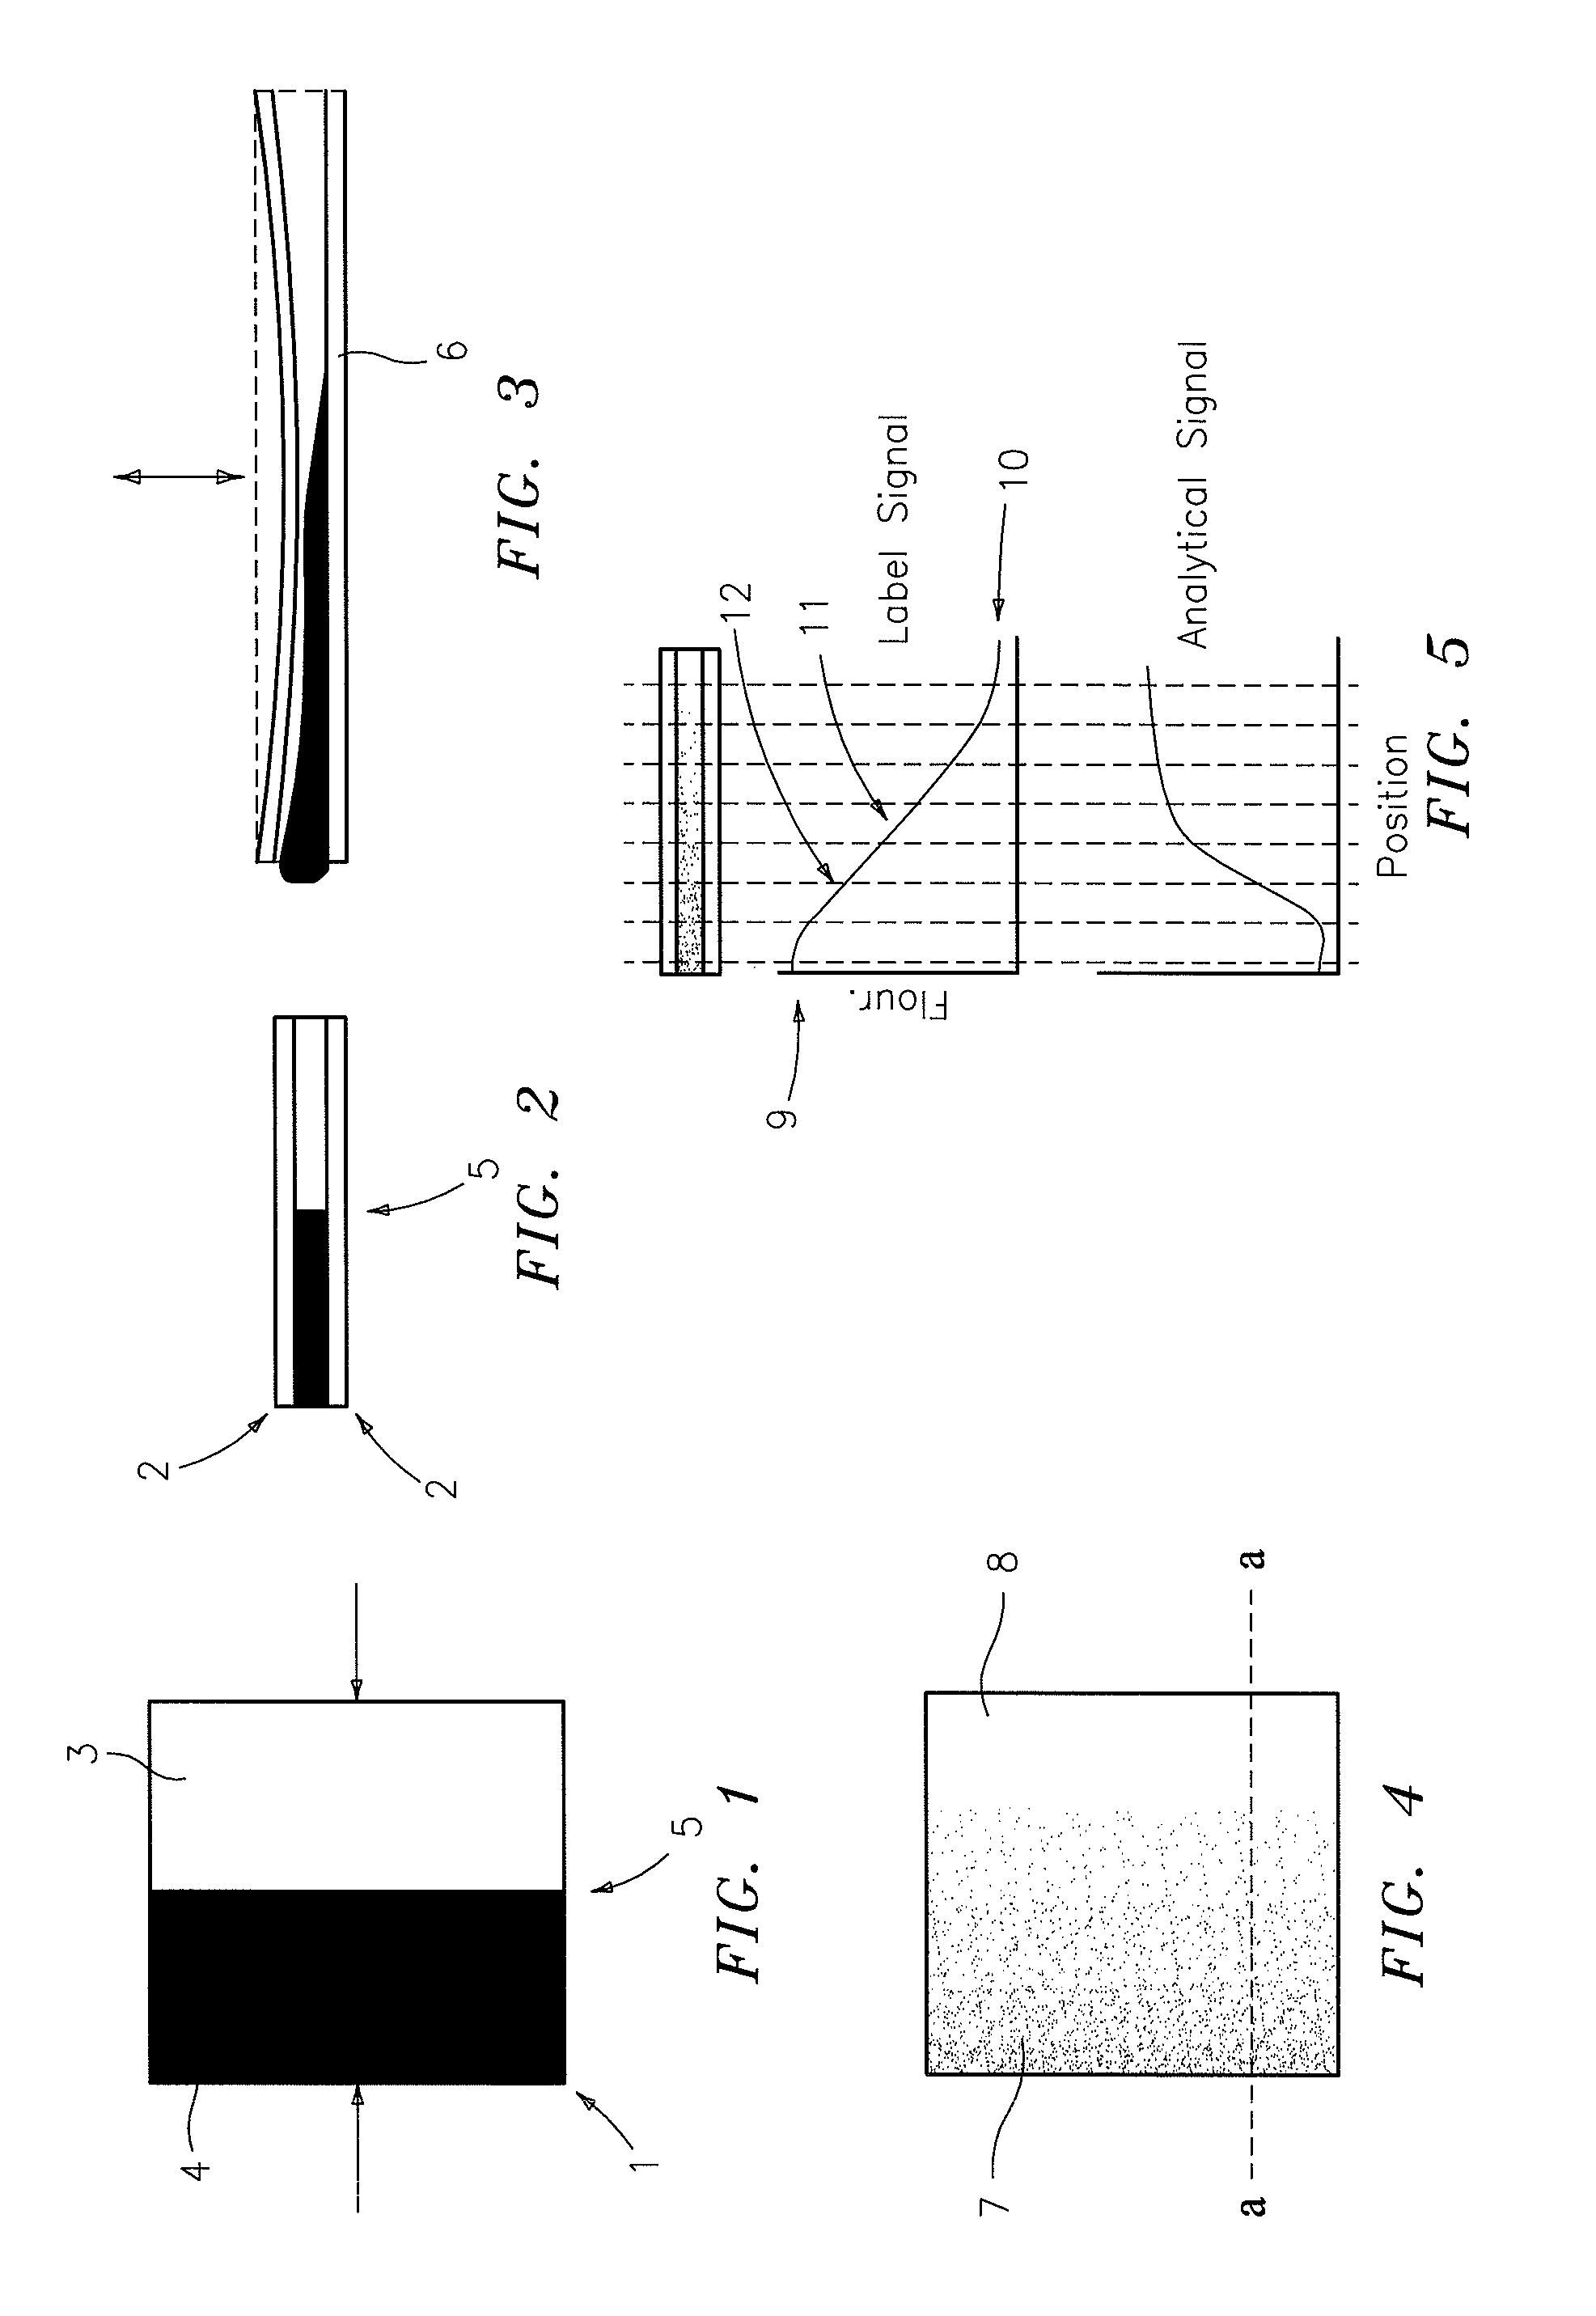 Self-calibrating gradient dilution in a constituent assay and gradient dilution apparatus performed in a thin film sample